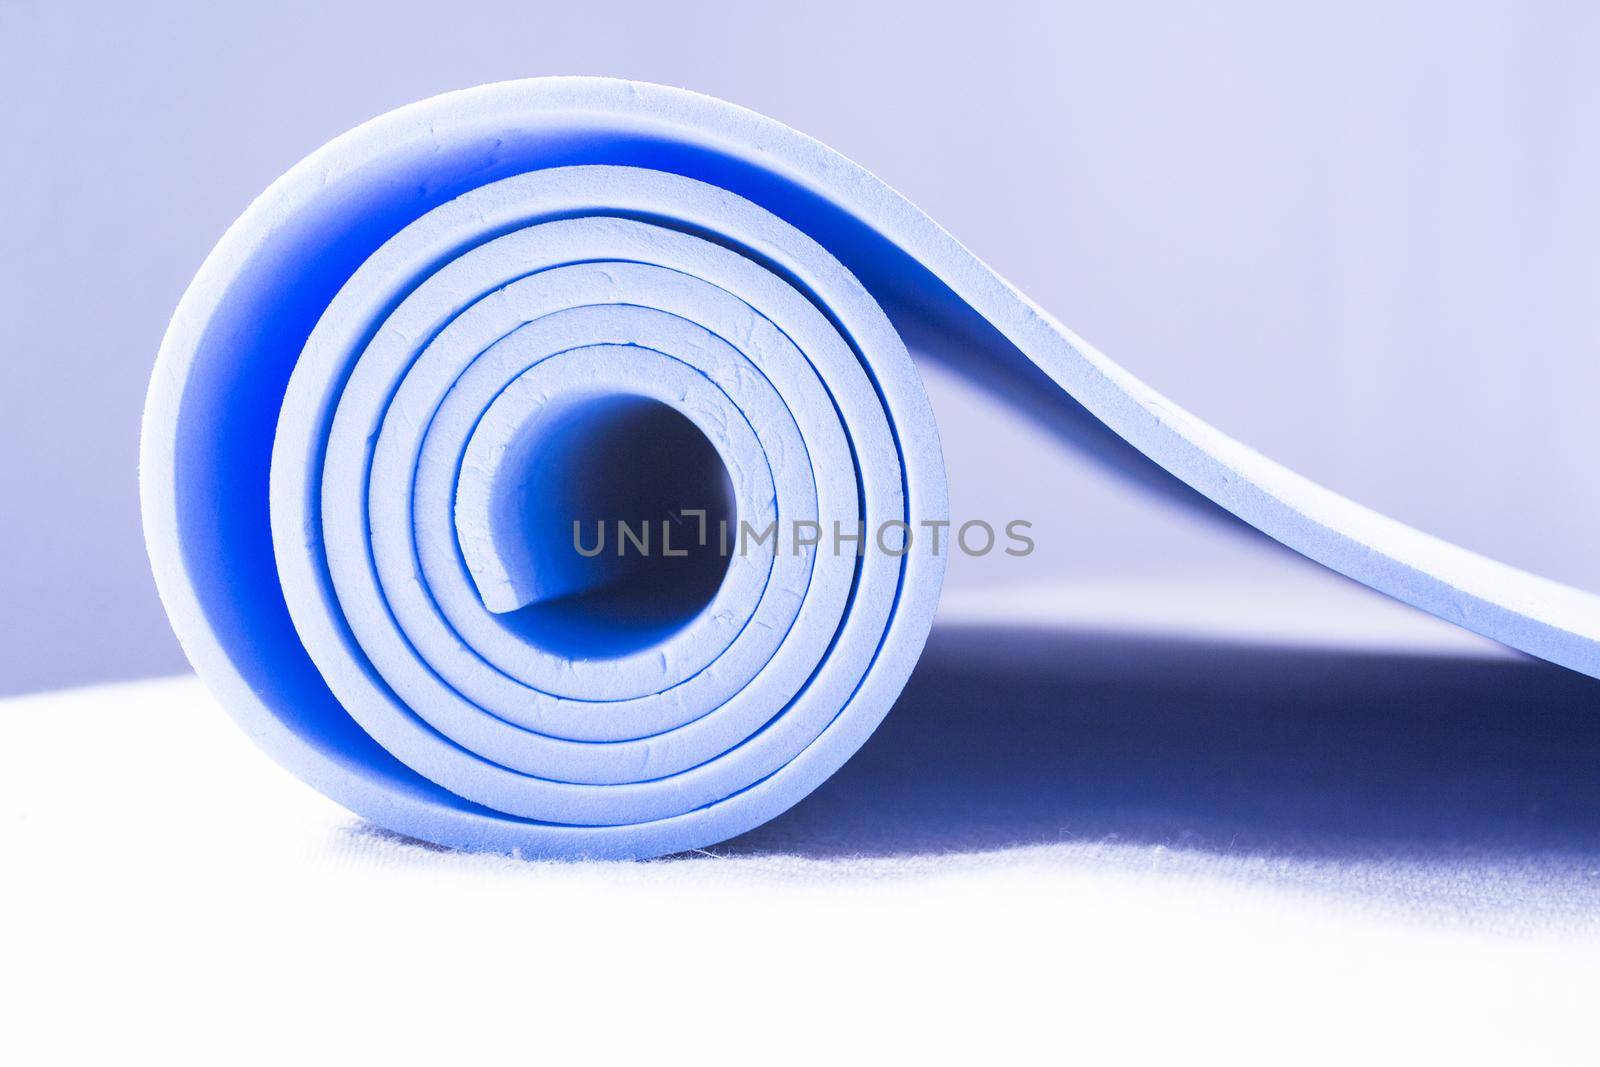 Mat for practicing yoga, pilates and stretching exercises by GemaIbarra